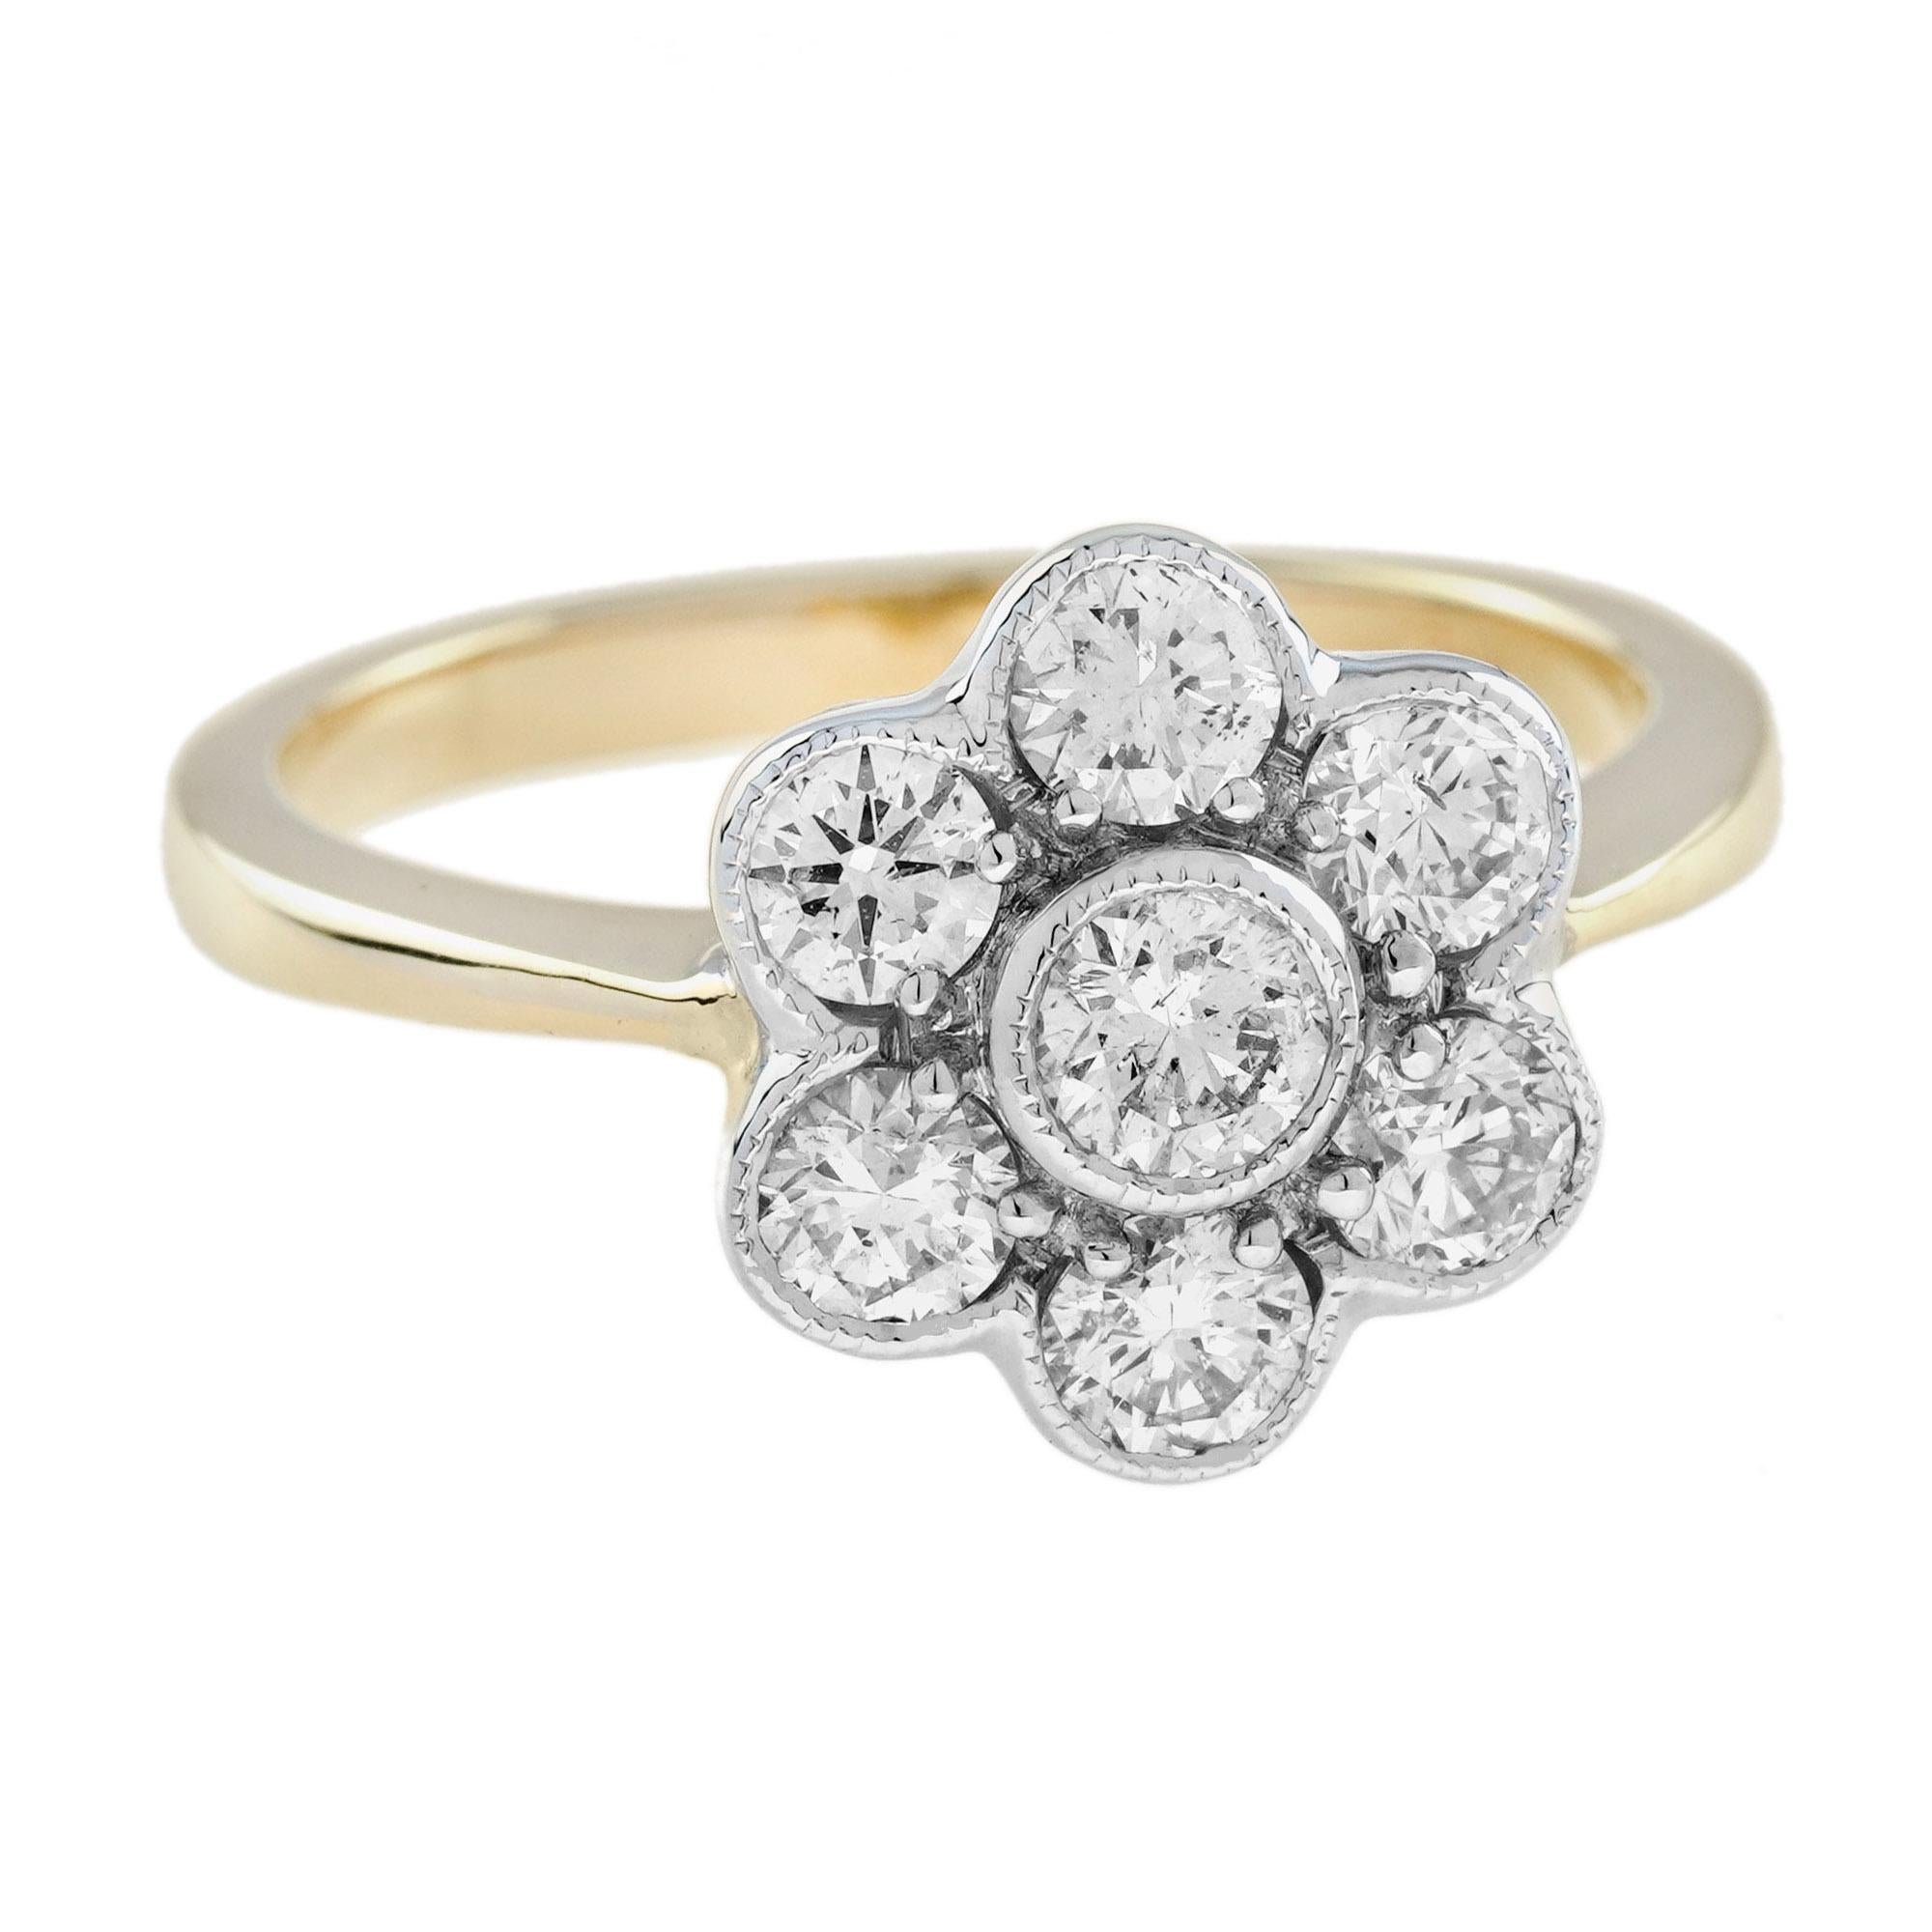 Round Cut Diamond Daisy Edwardian Style Cluster Engagement Ring in 18K Gold